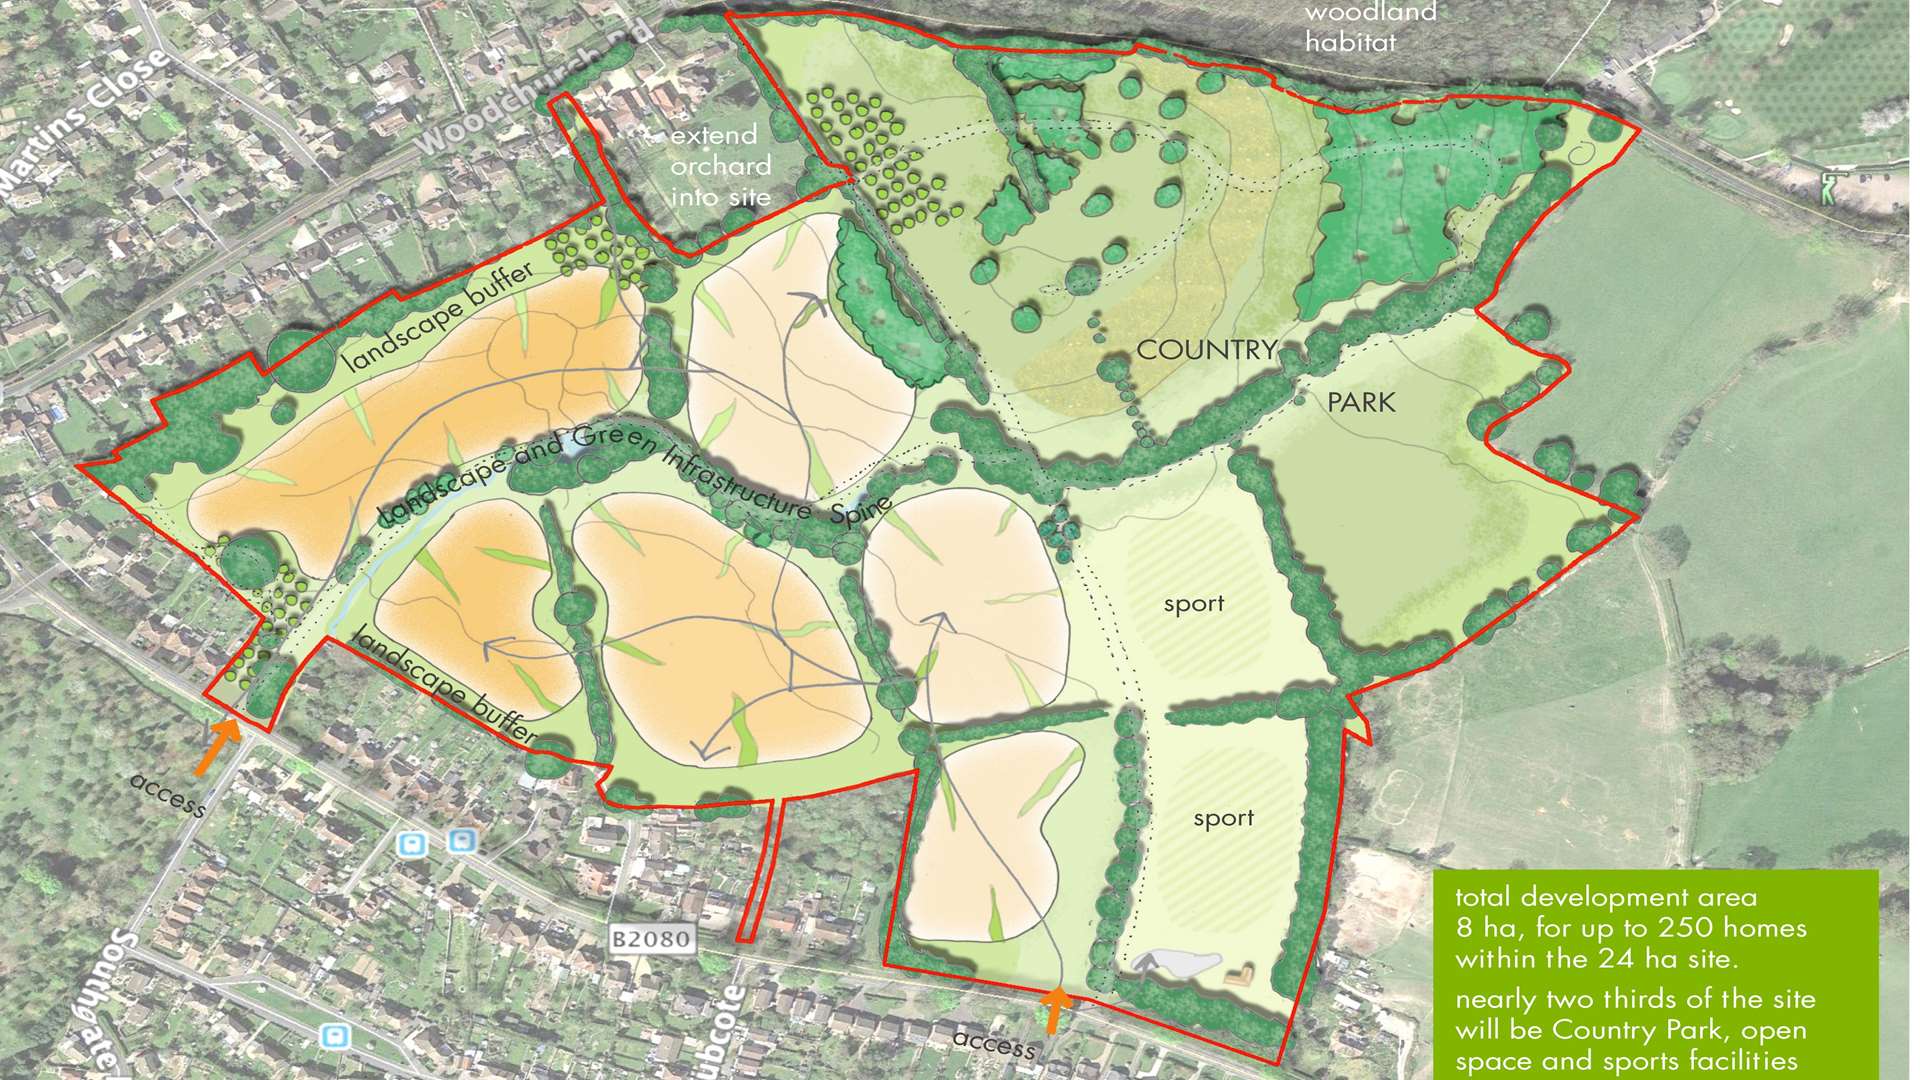 The Wates plan for housing that shows the proposed sports hub